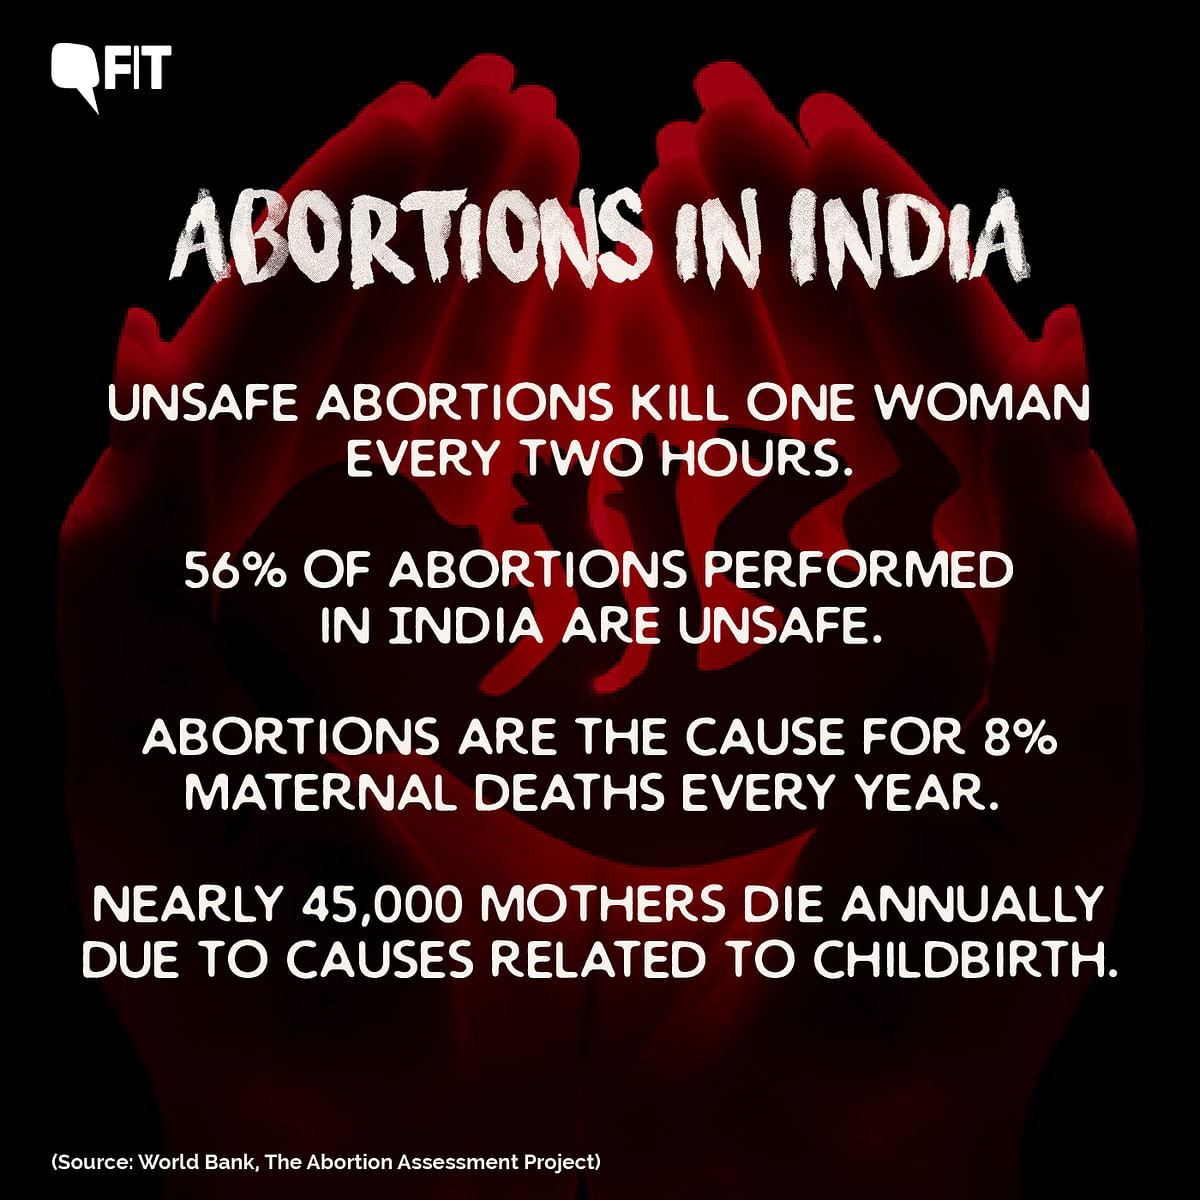 

Unsafe abortions kill one woman every two hours, according to a report by Global Health Strategies, India.